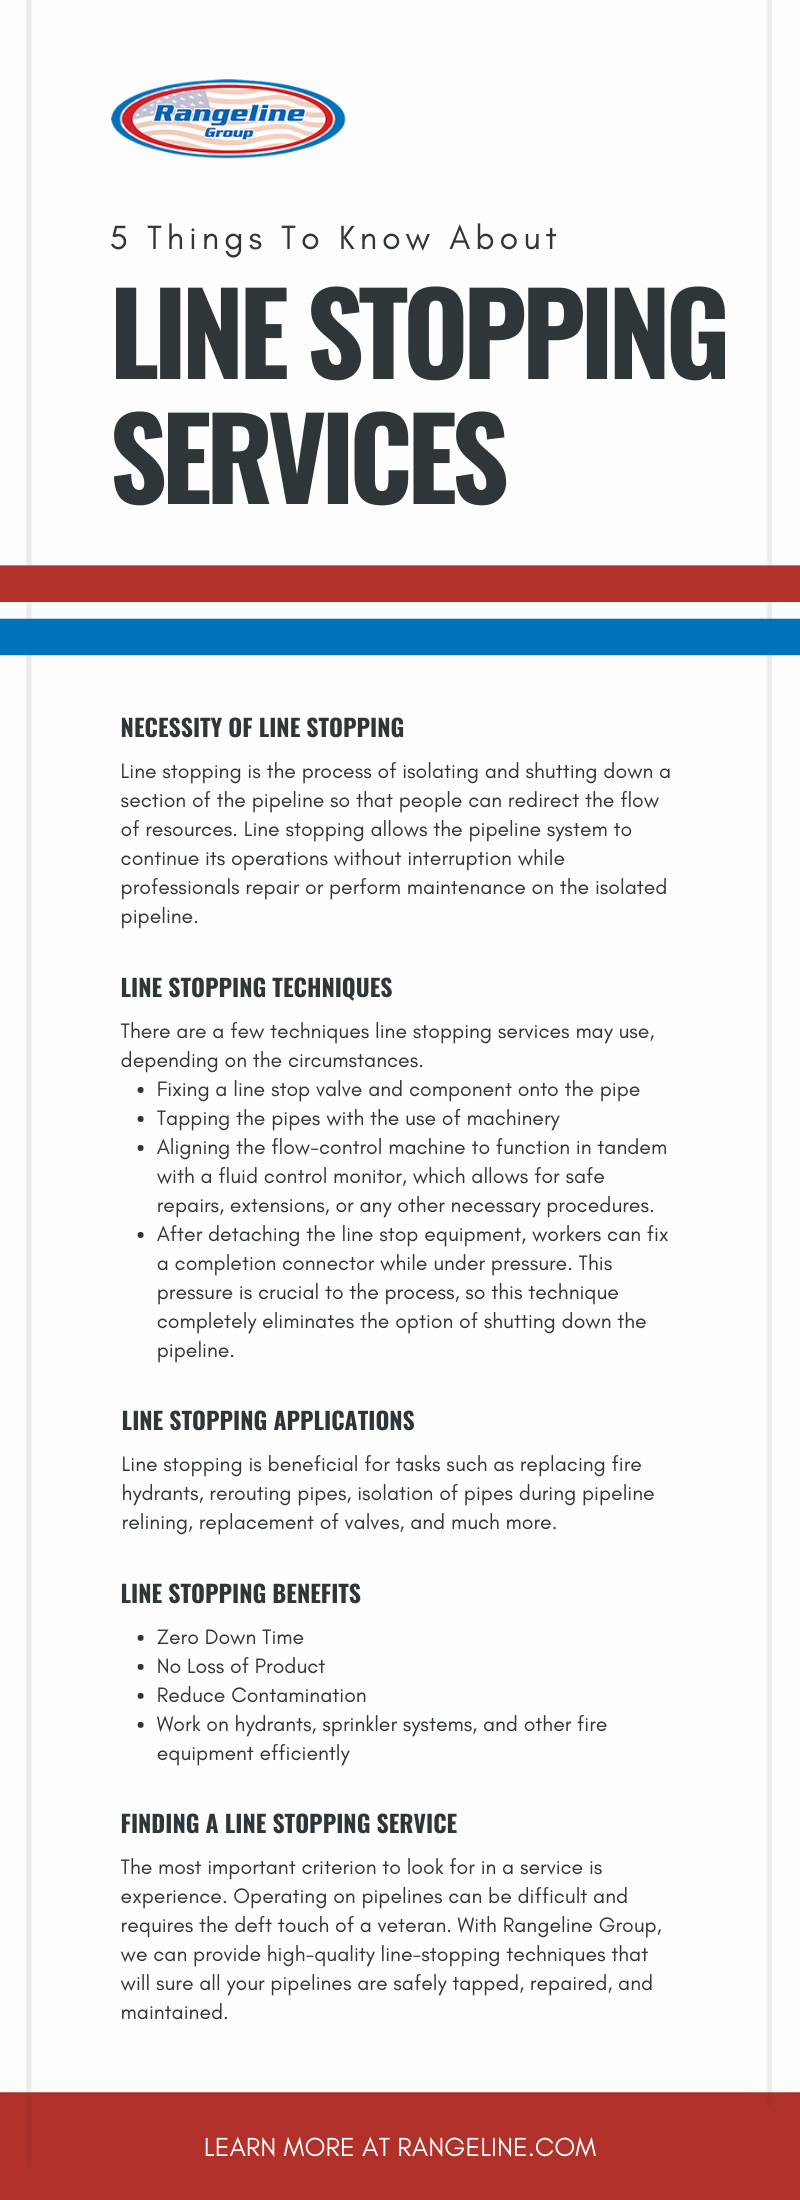 5 Things To Know About Line Stopping Services